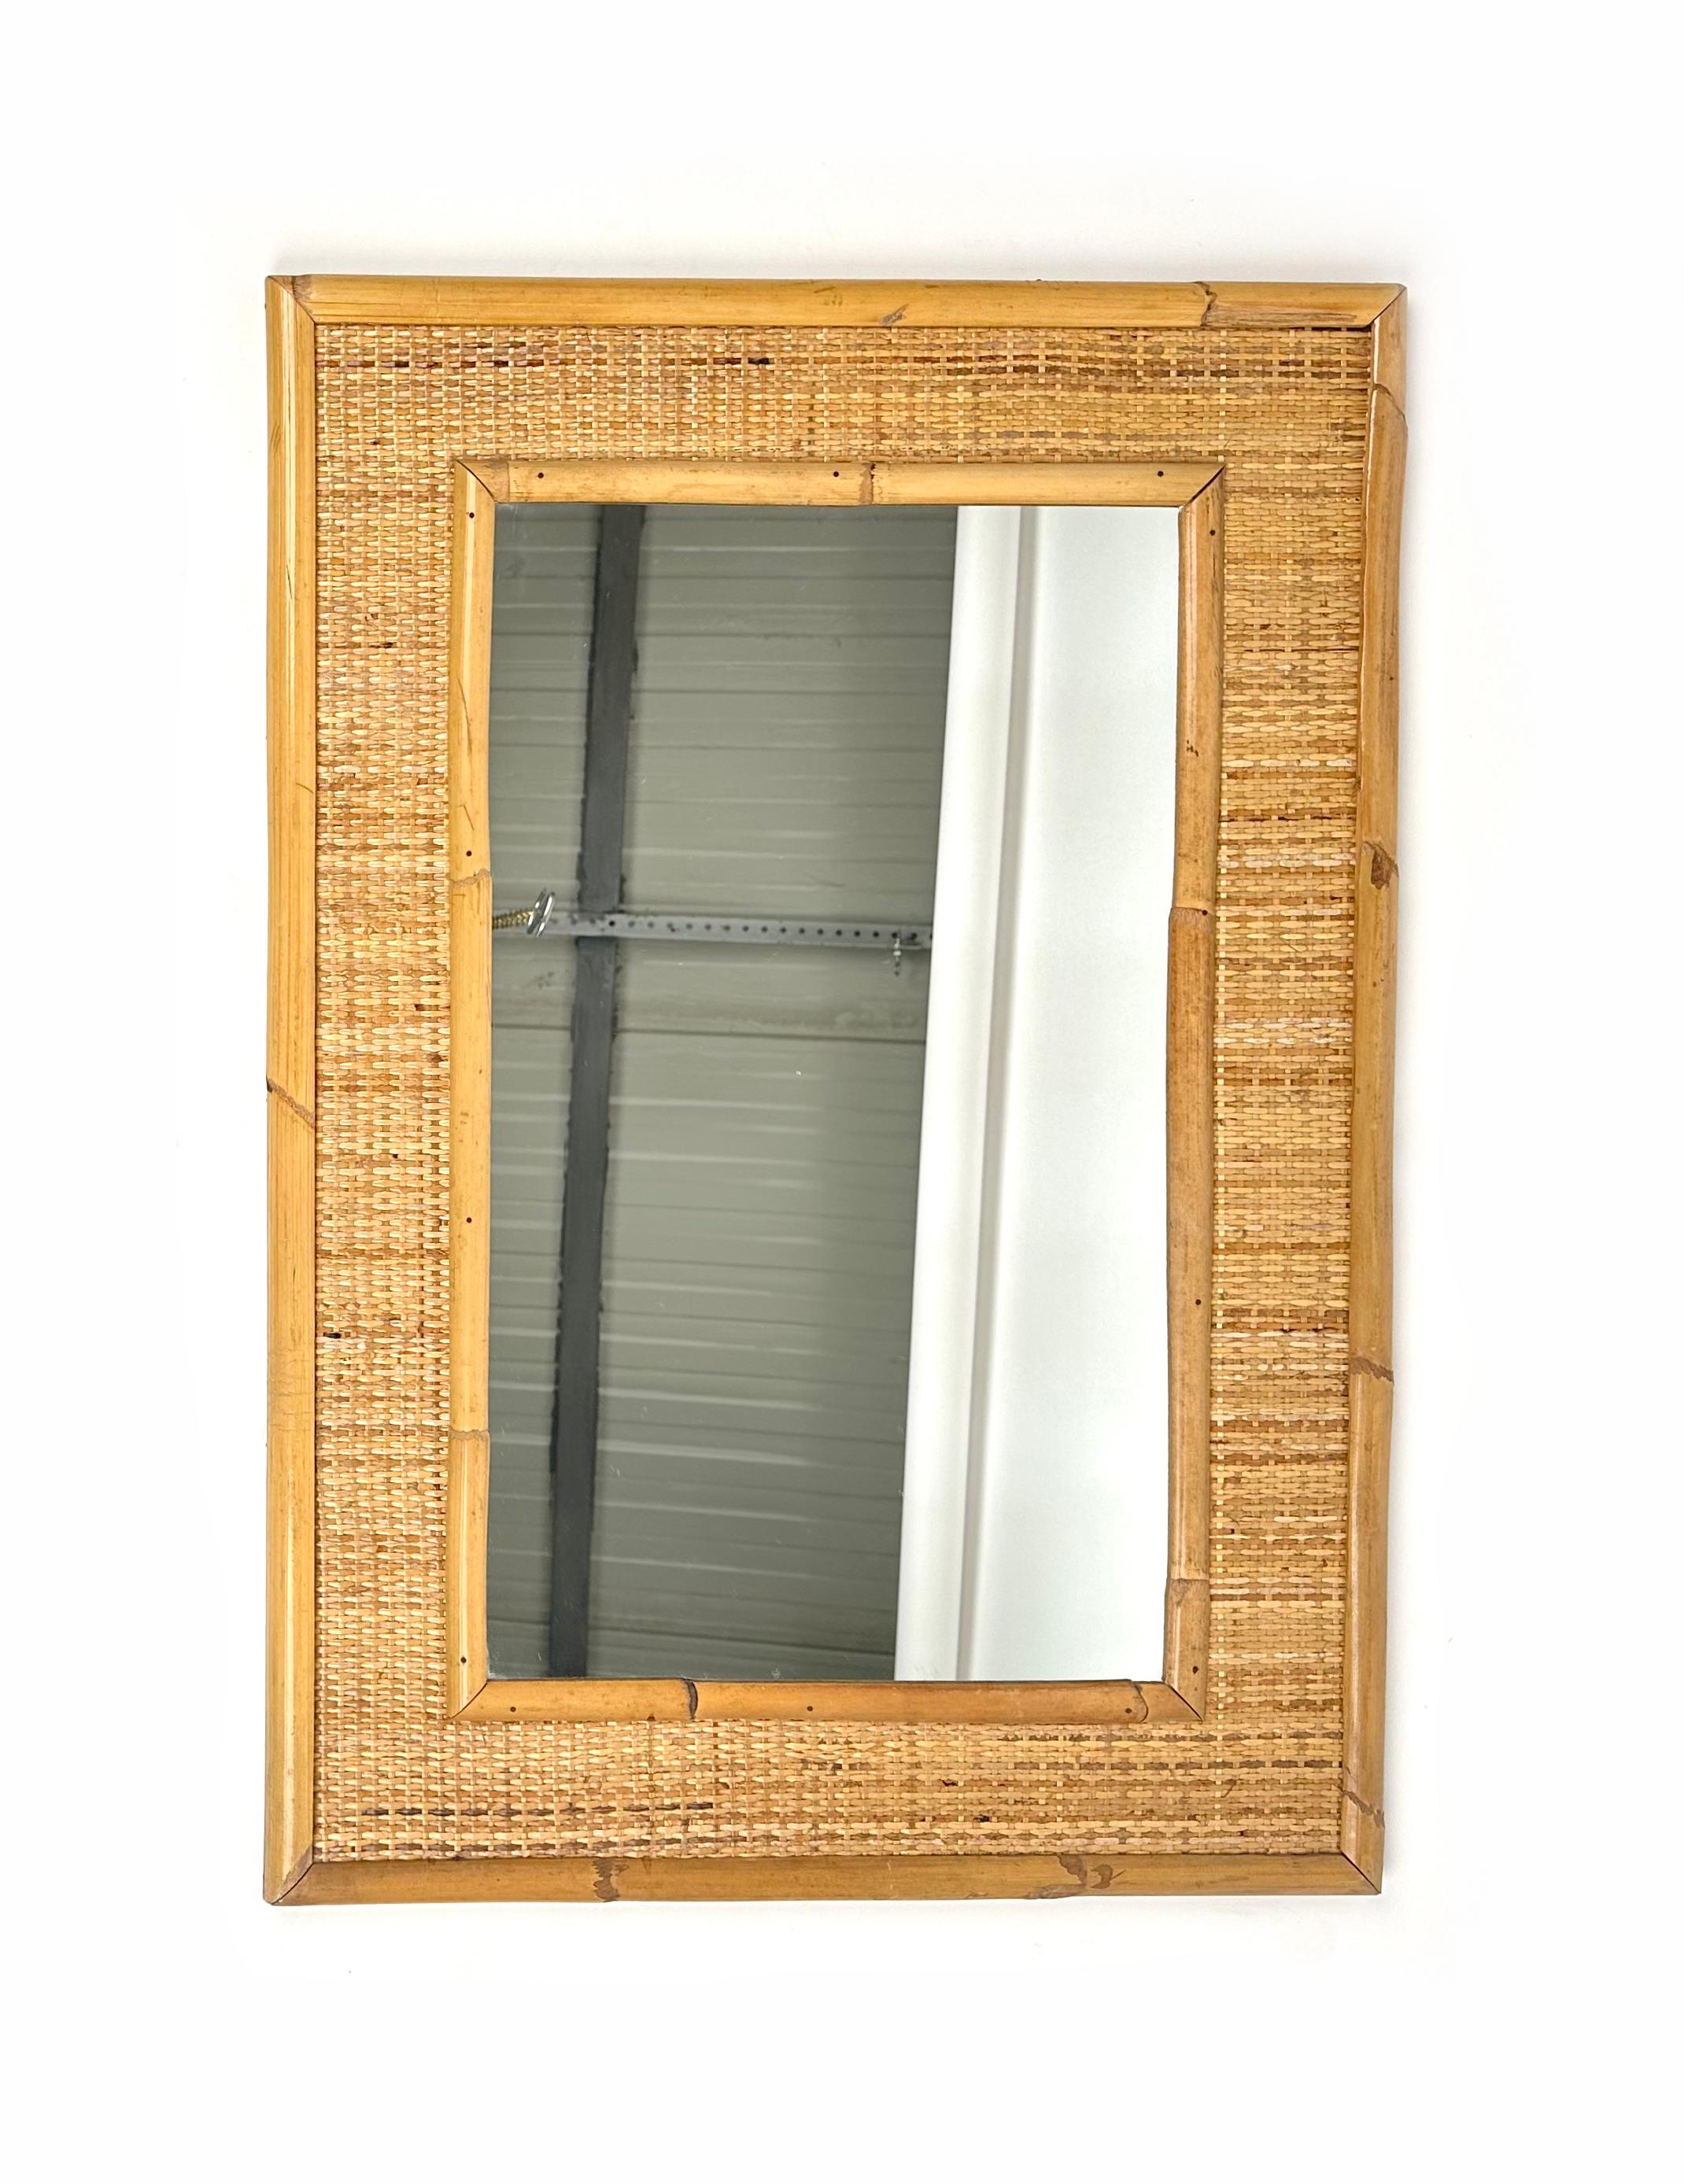 Italian Midcentury Rectangular Bamboo and Rattan Wall Mirror, Italy 1960s For Sale